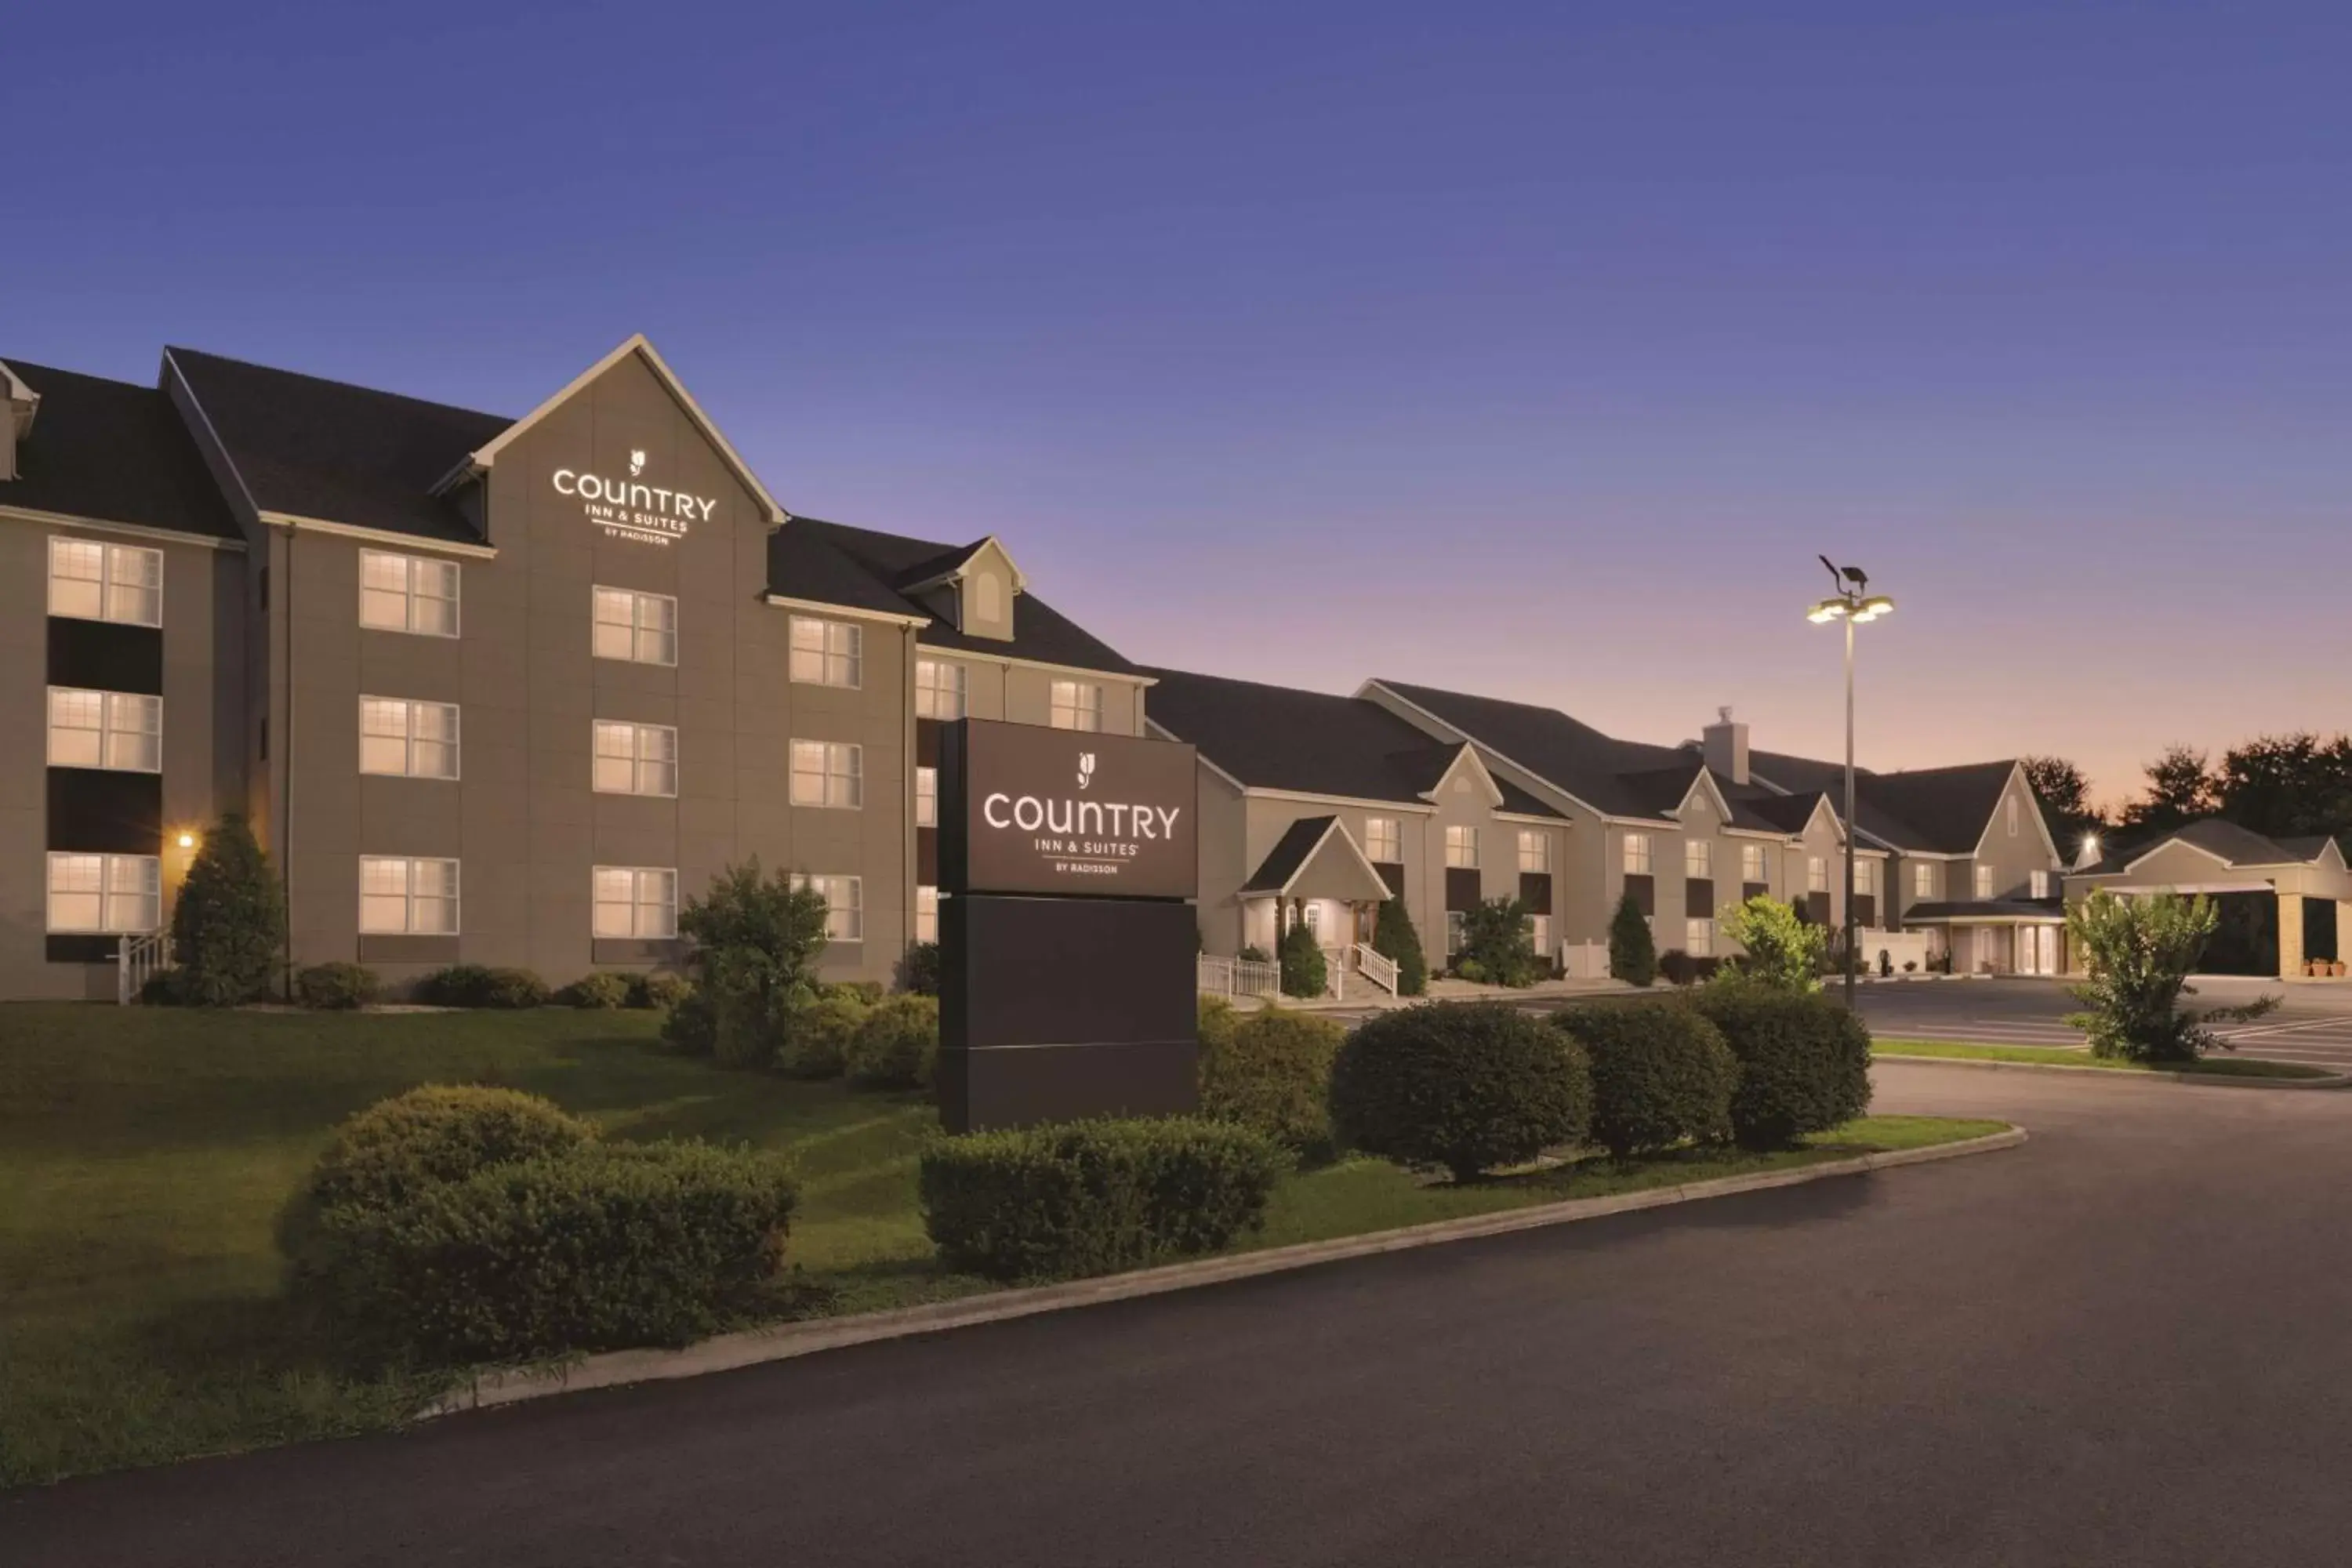 Property building in Country Inn & Suites by Radisson, Roanoke, VA